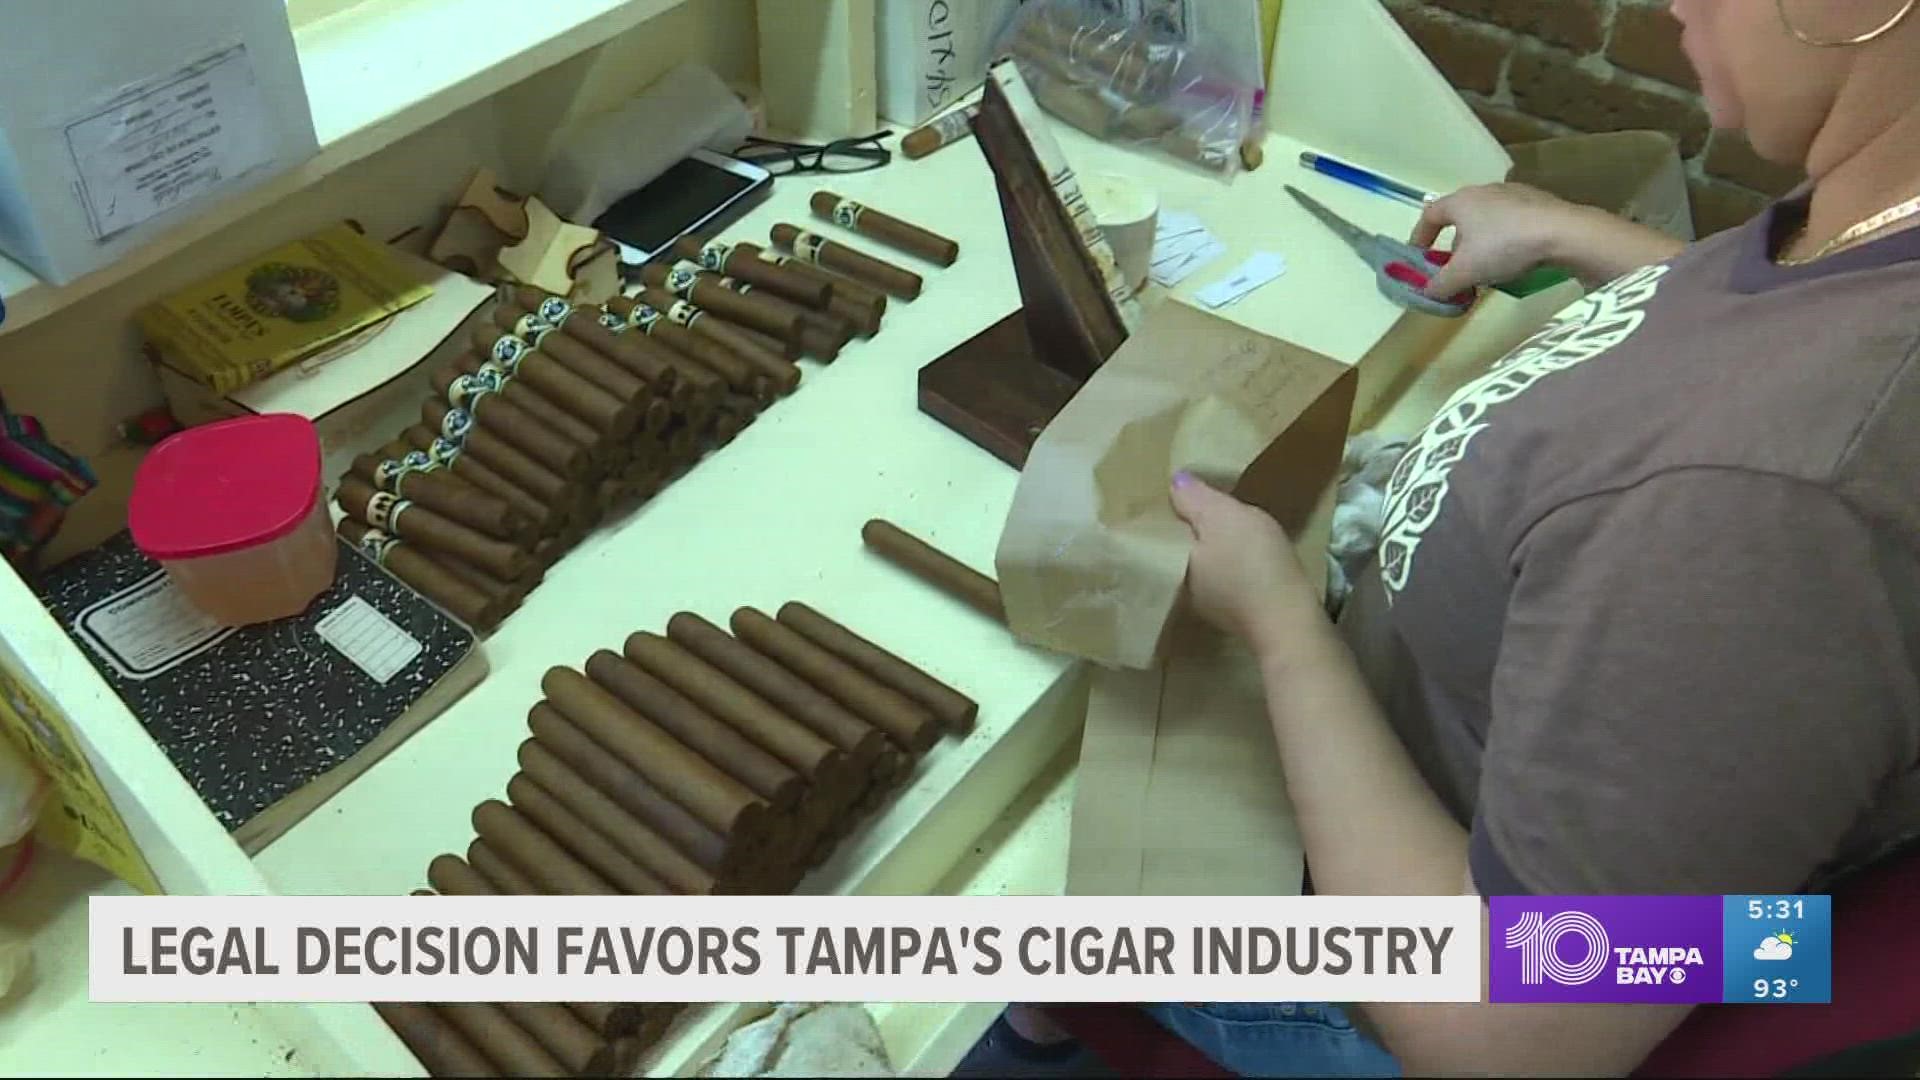 Tampa has a long history of cigar-making, dating back more than 100 years.